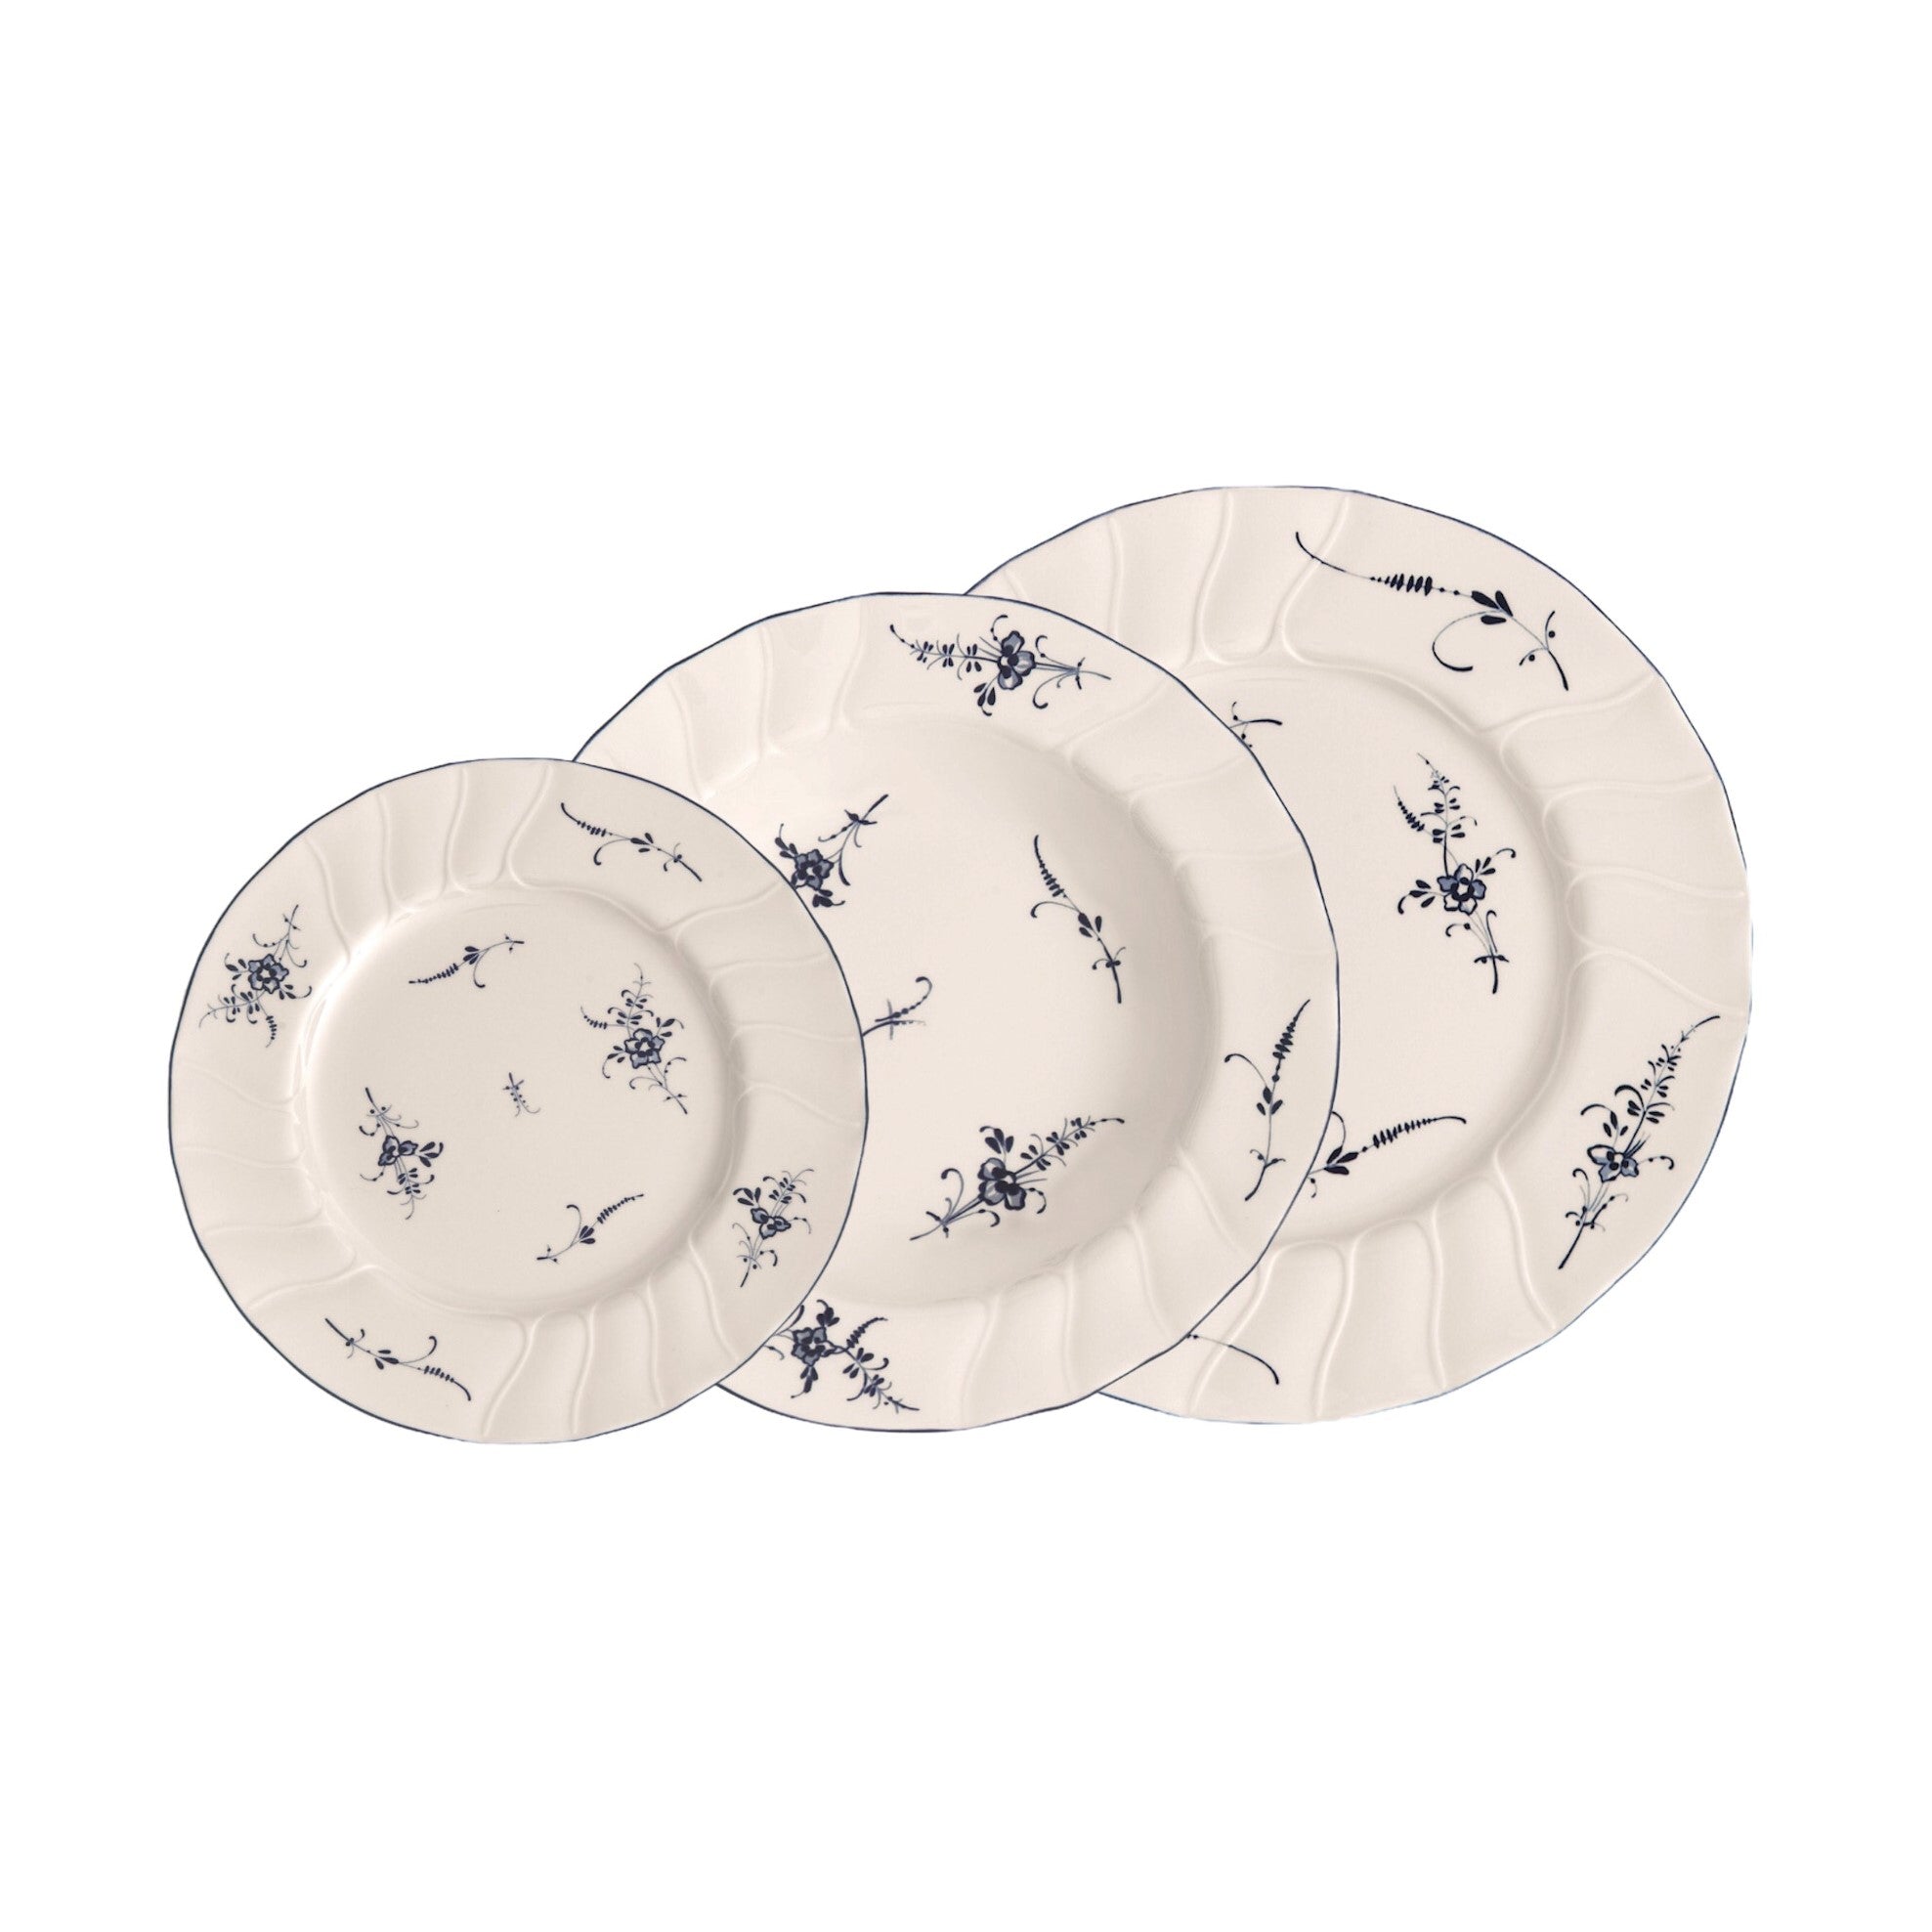 Villeroy &amp; Boch Old Luxembourg 18-piece set for 6 people, consisting of: 6 dinner plates, 6 soup plates, 6 dessert plates